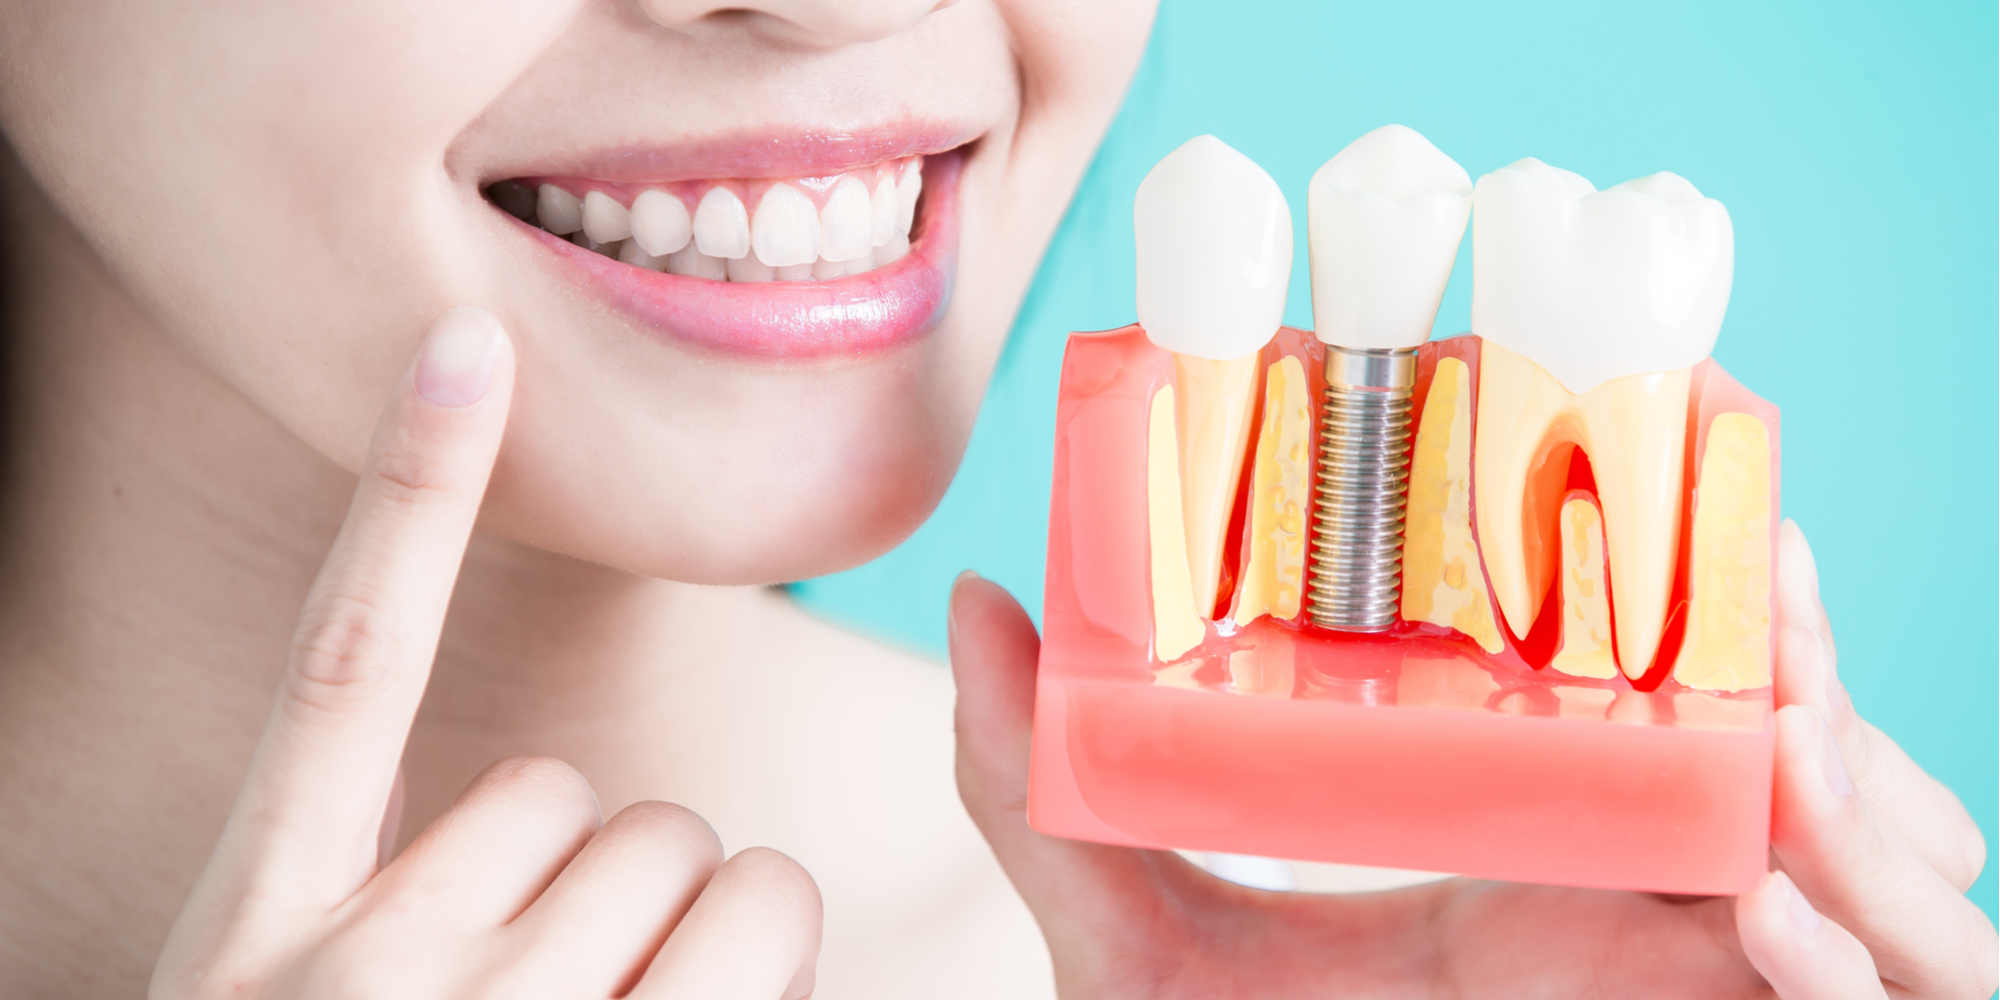 What are Dental Implants and How Can They Better Your Smile?